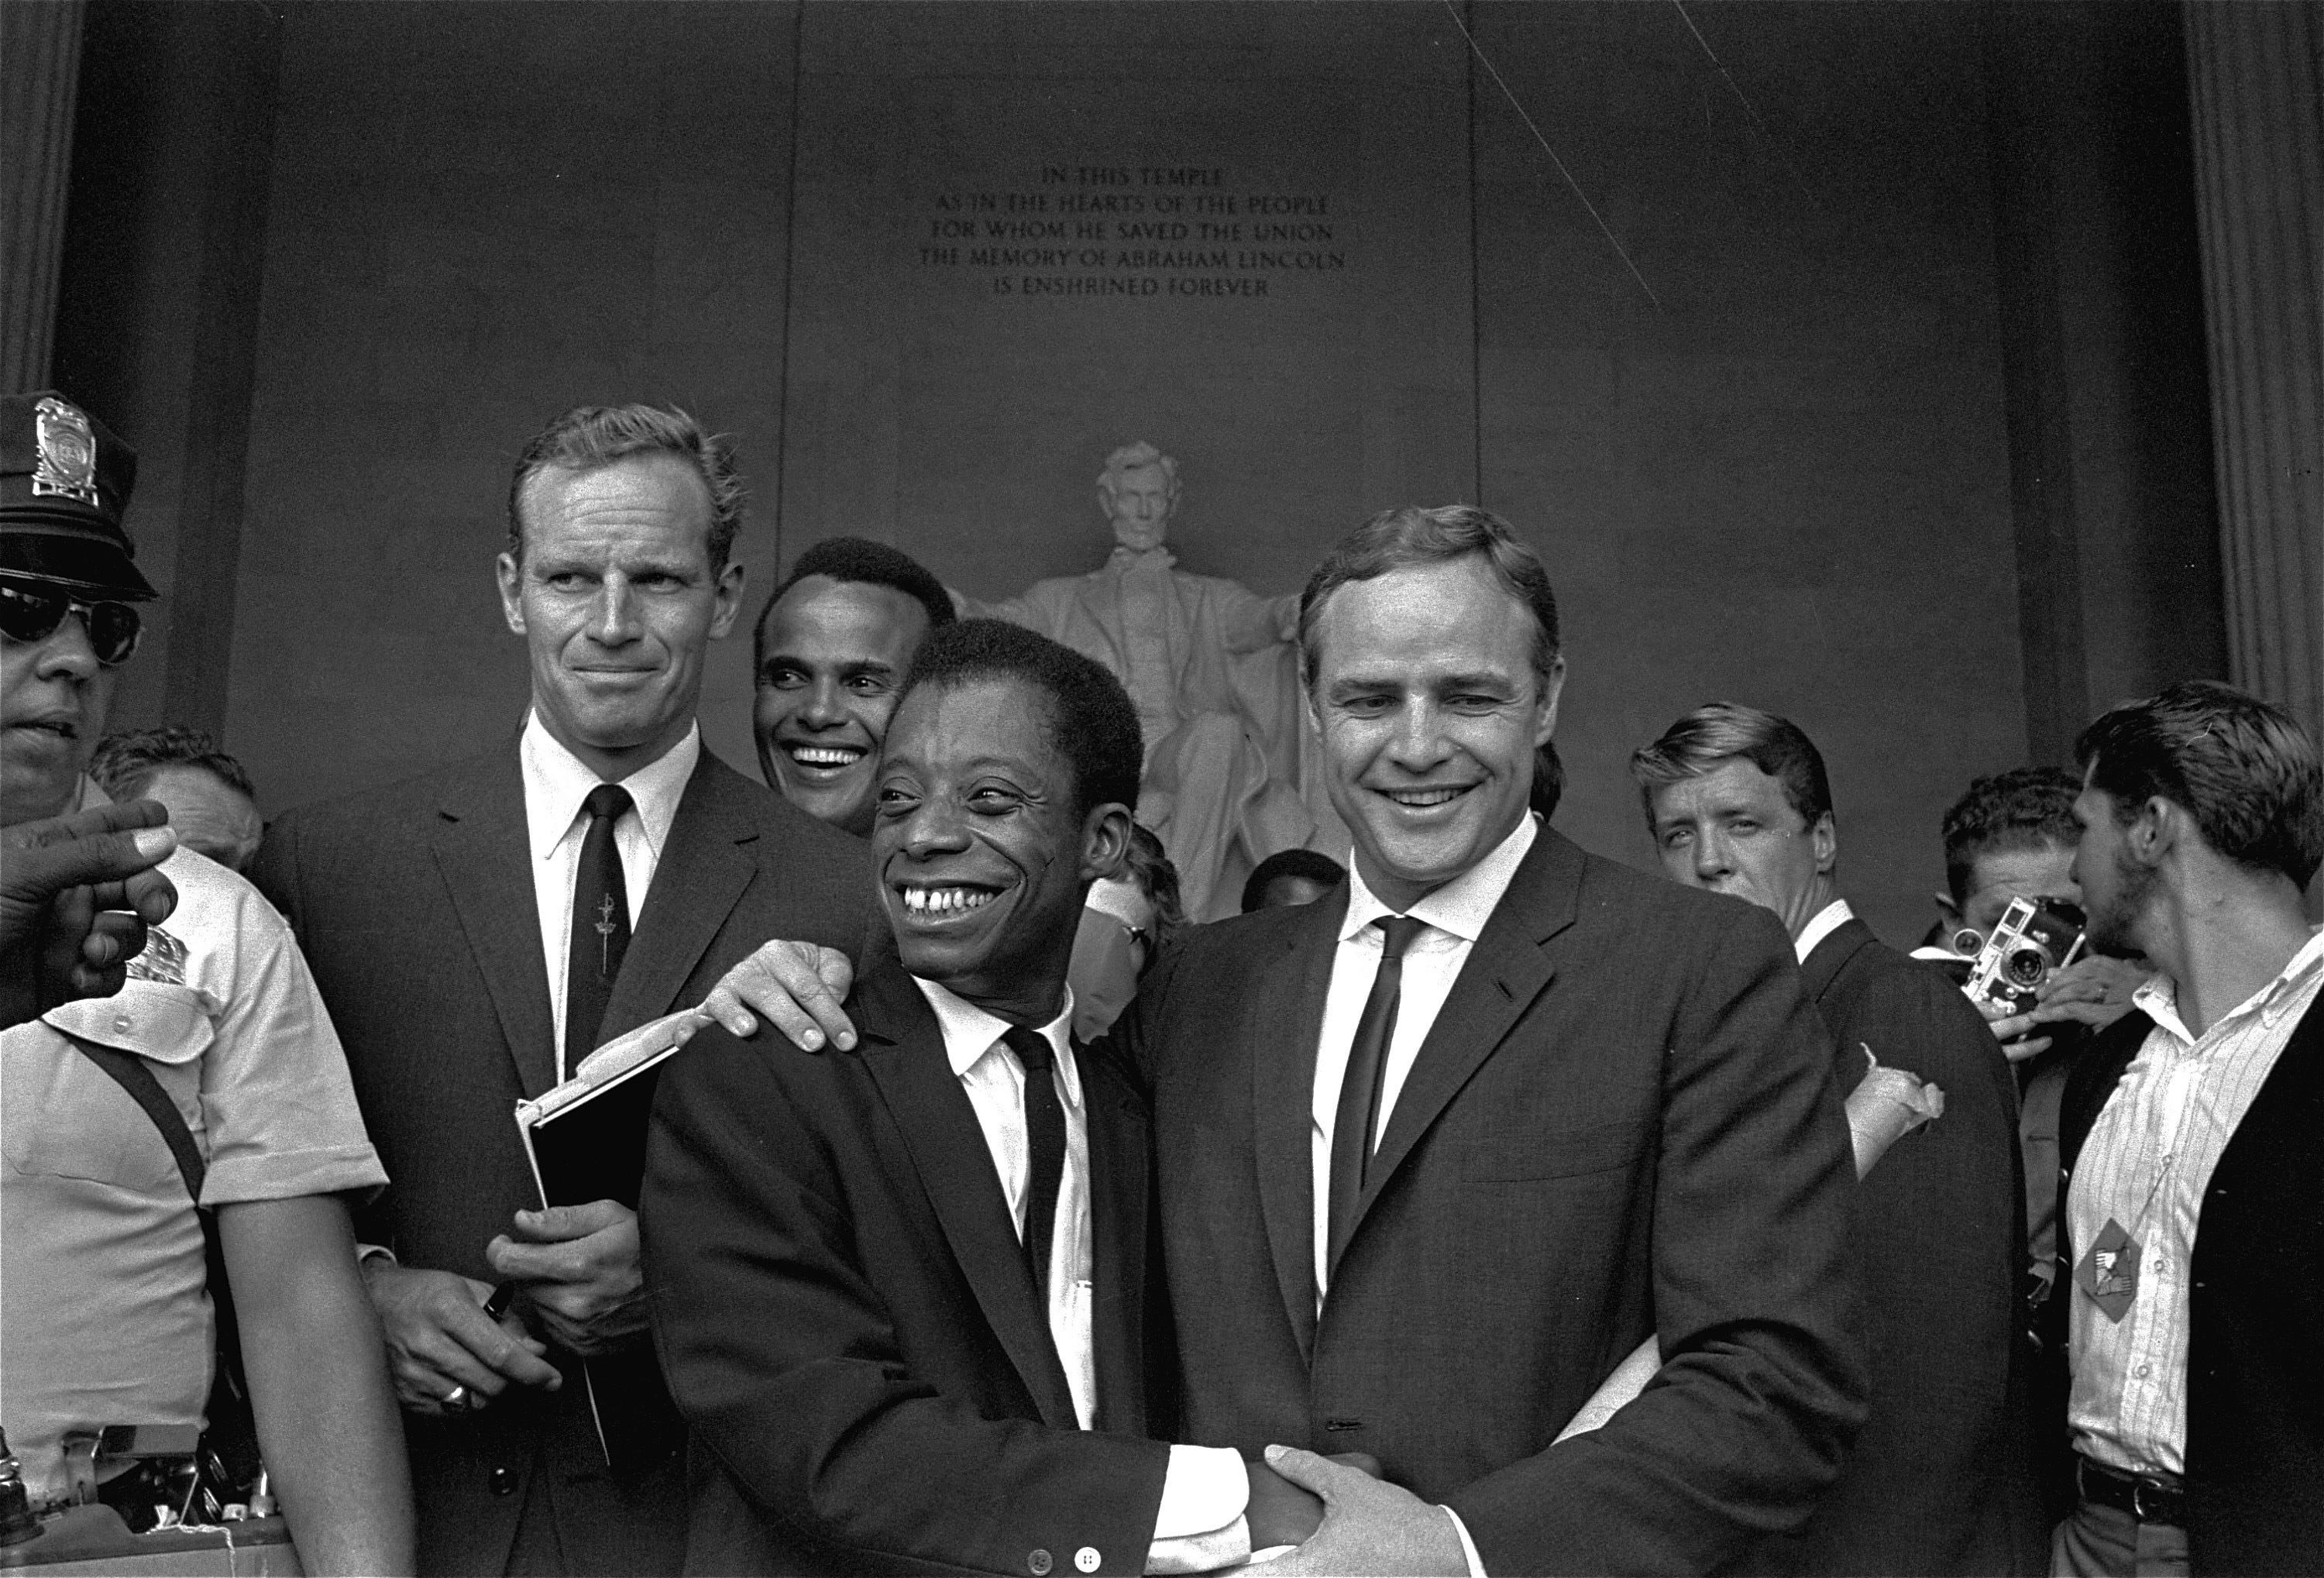 Actor Marlon Brando, right, poses with his arm around James Baldwin, author and civil rights leader, in front of the Lincoln statue at the Lincoln Memorial, August 28, 1963, during the March on Washington demonstration ceremonies which followed the mass parade.  Posing with them are actors Charlton Heston, left, and Harry Belafonte.  (AP Photo) ORG XMIT: APHS200 [Via MerlinFTP Drop]